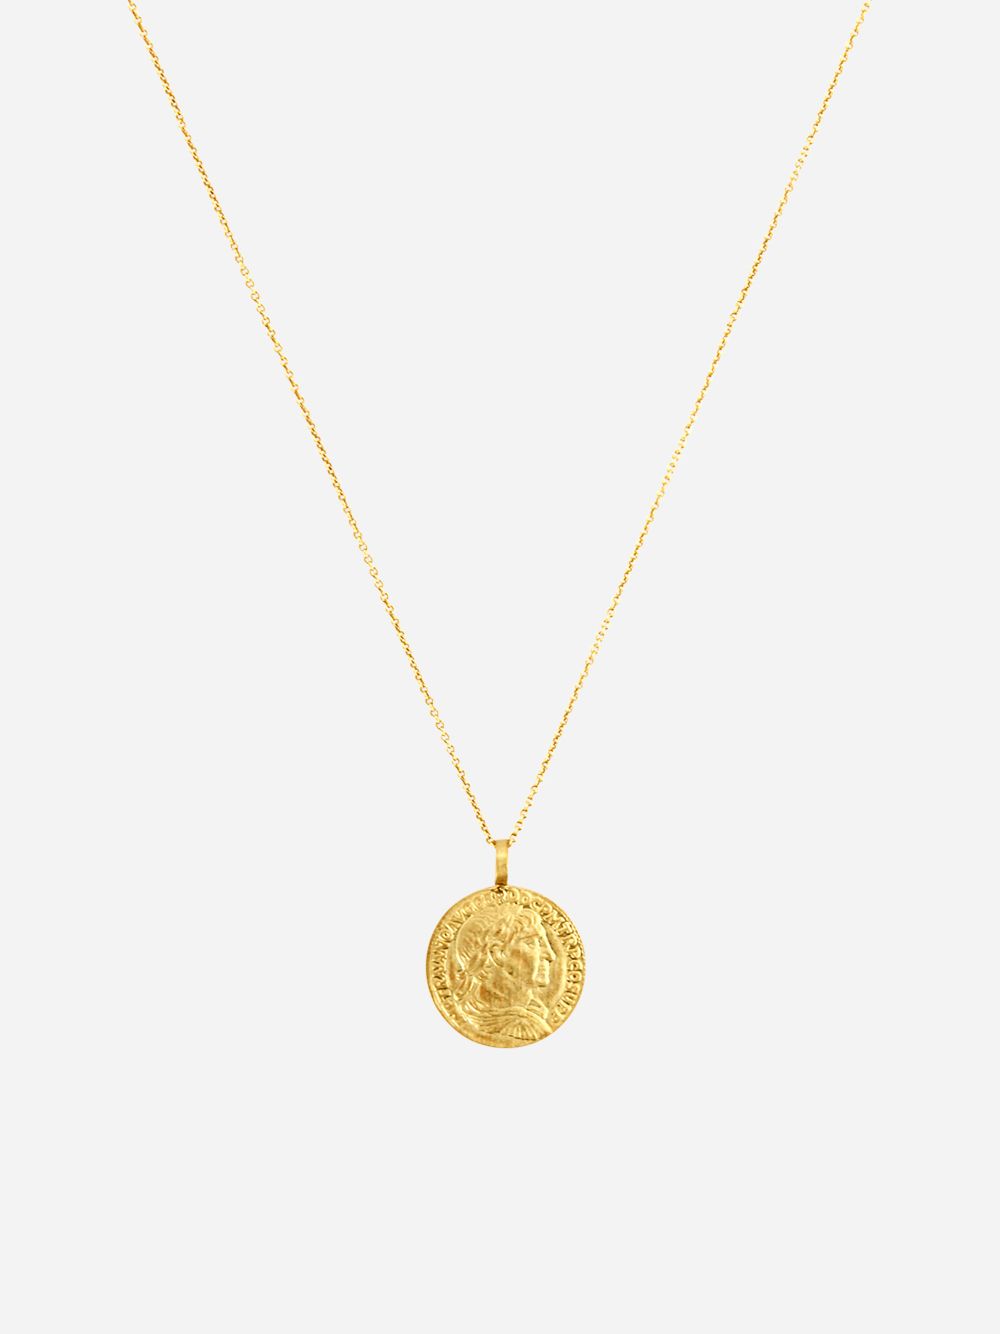 Roman Coin Necklace | Mesh Jewellery 